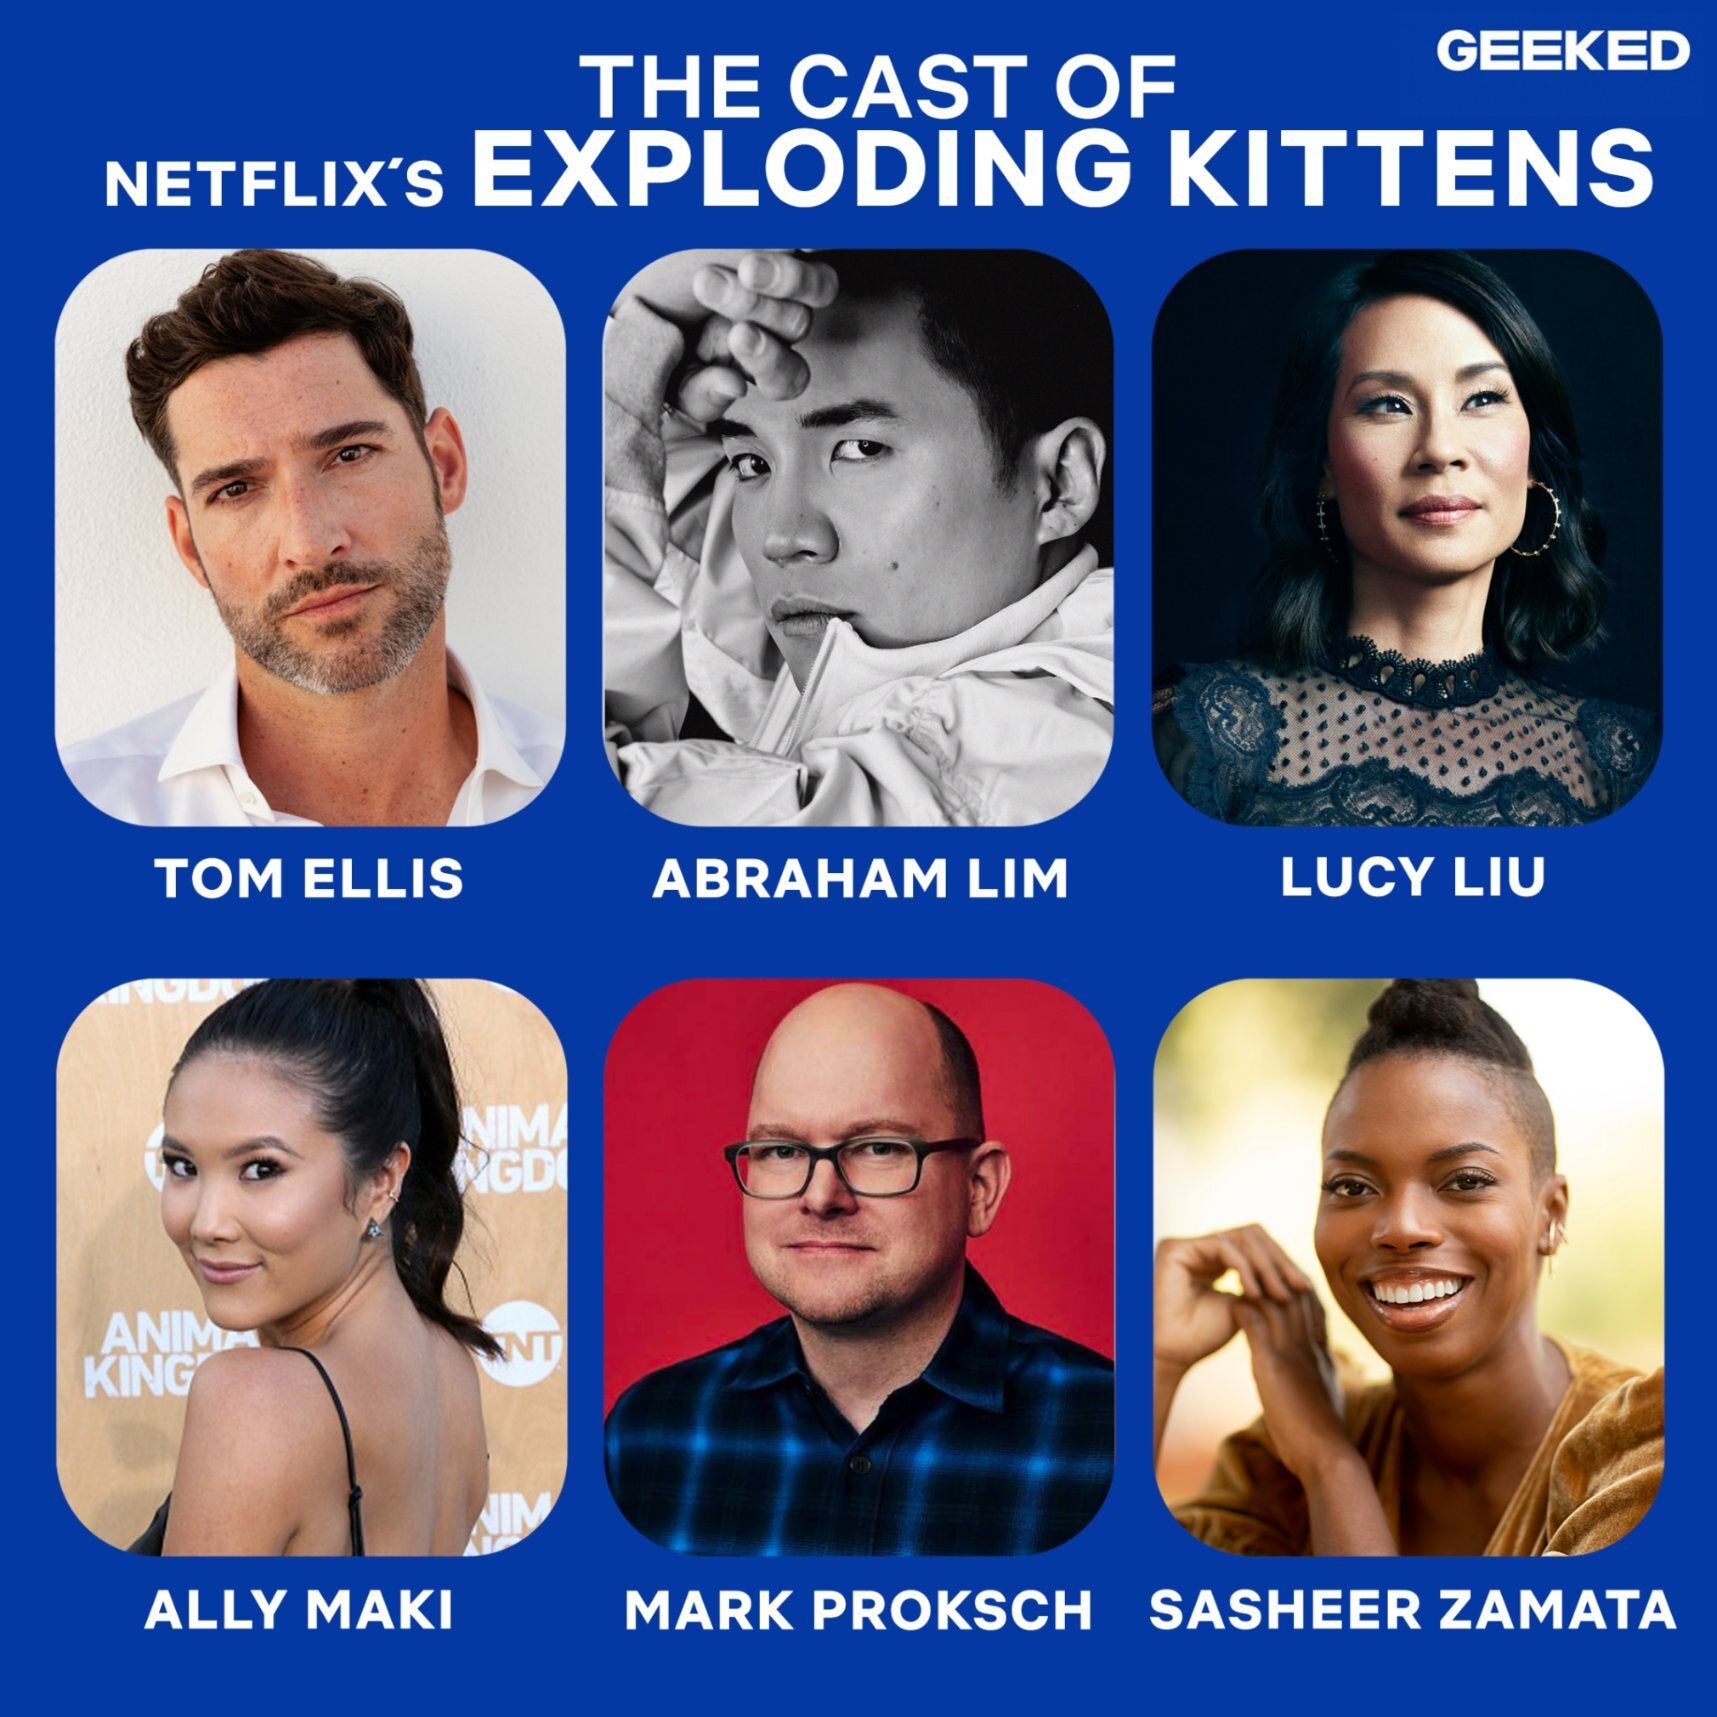 Exploding Kittens animated series cast - Netflix and Exploding Kittens team up for mobile game and animated comedy series